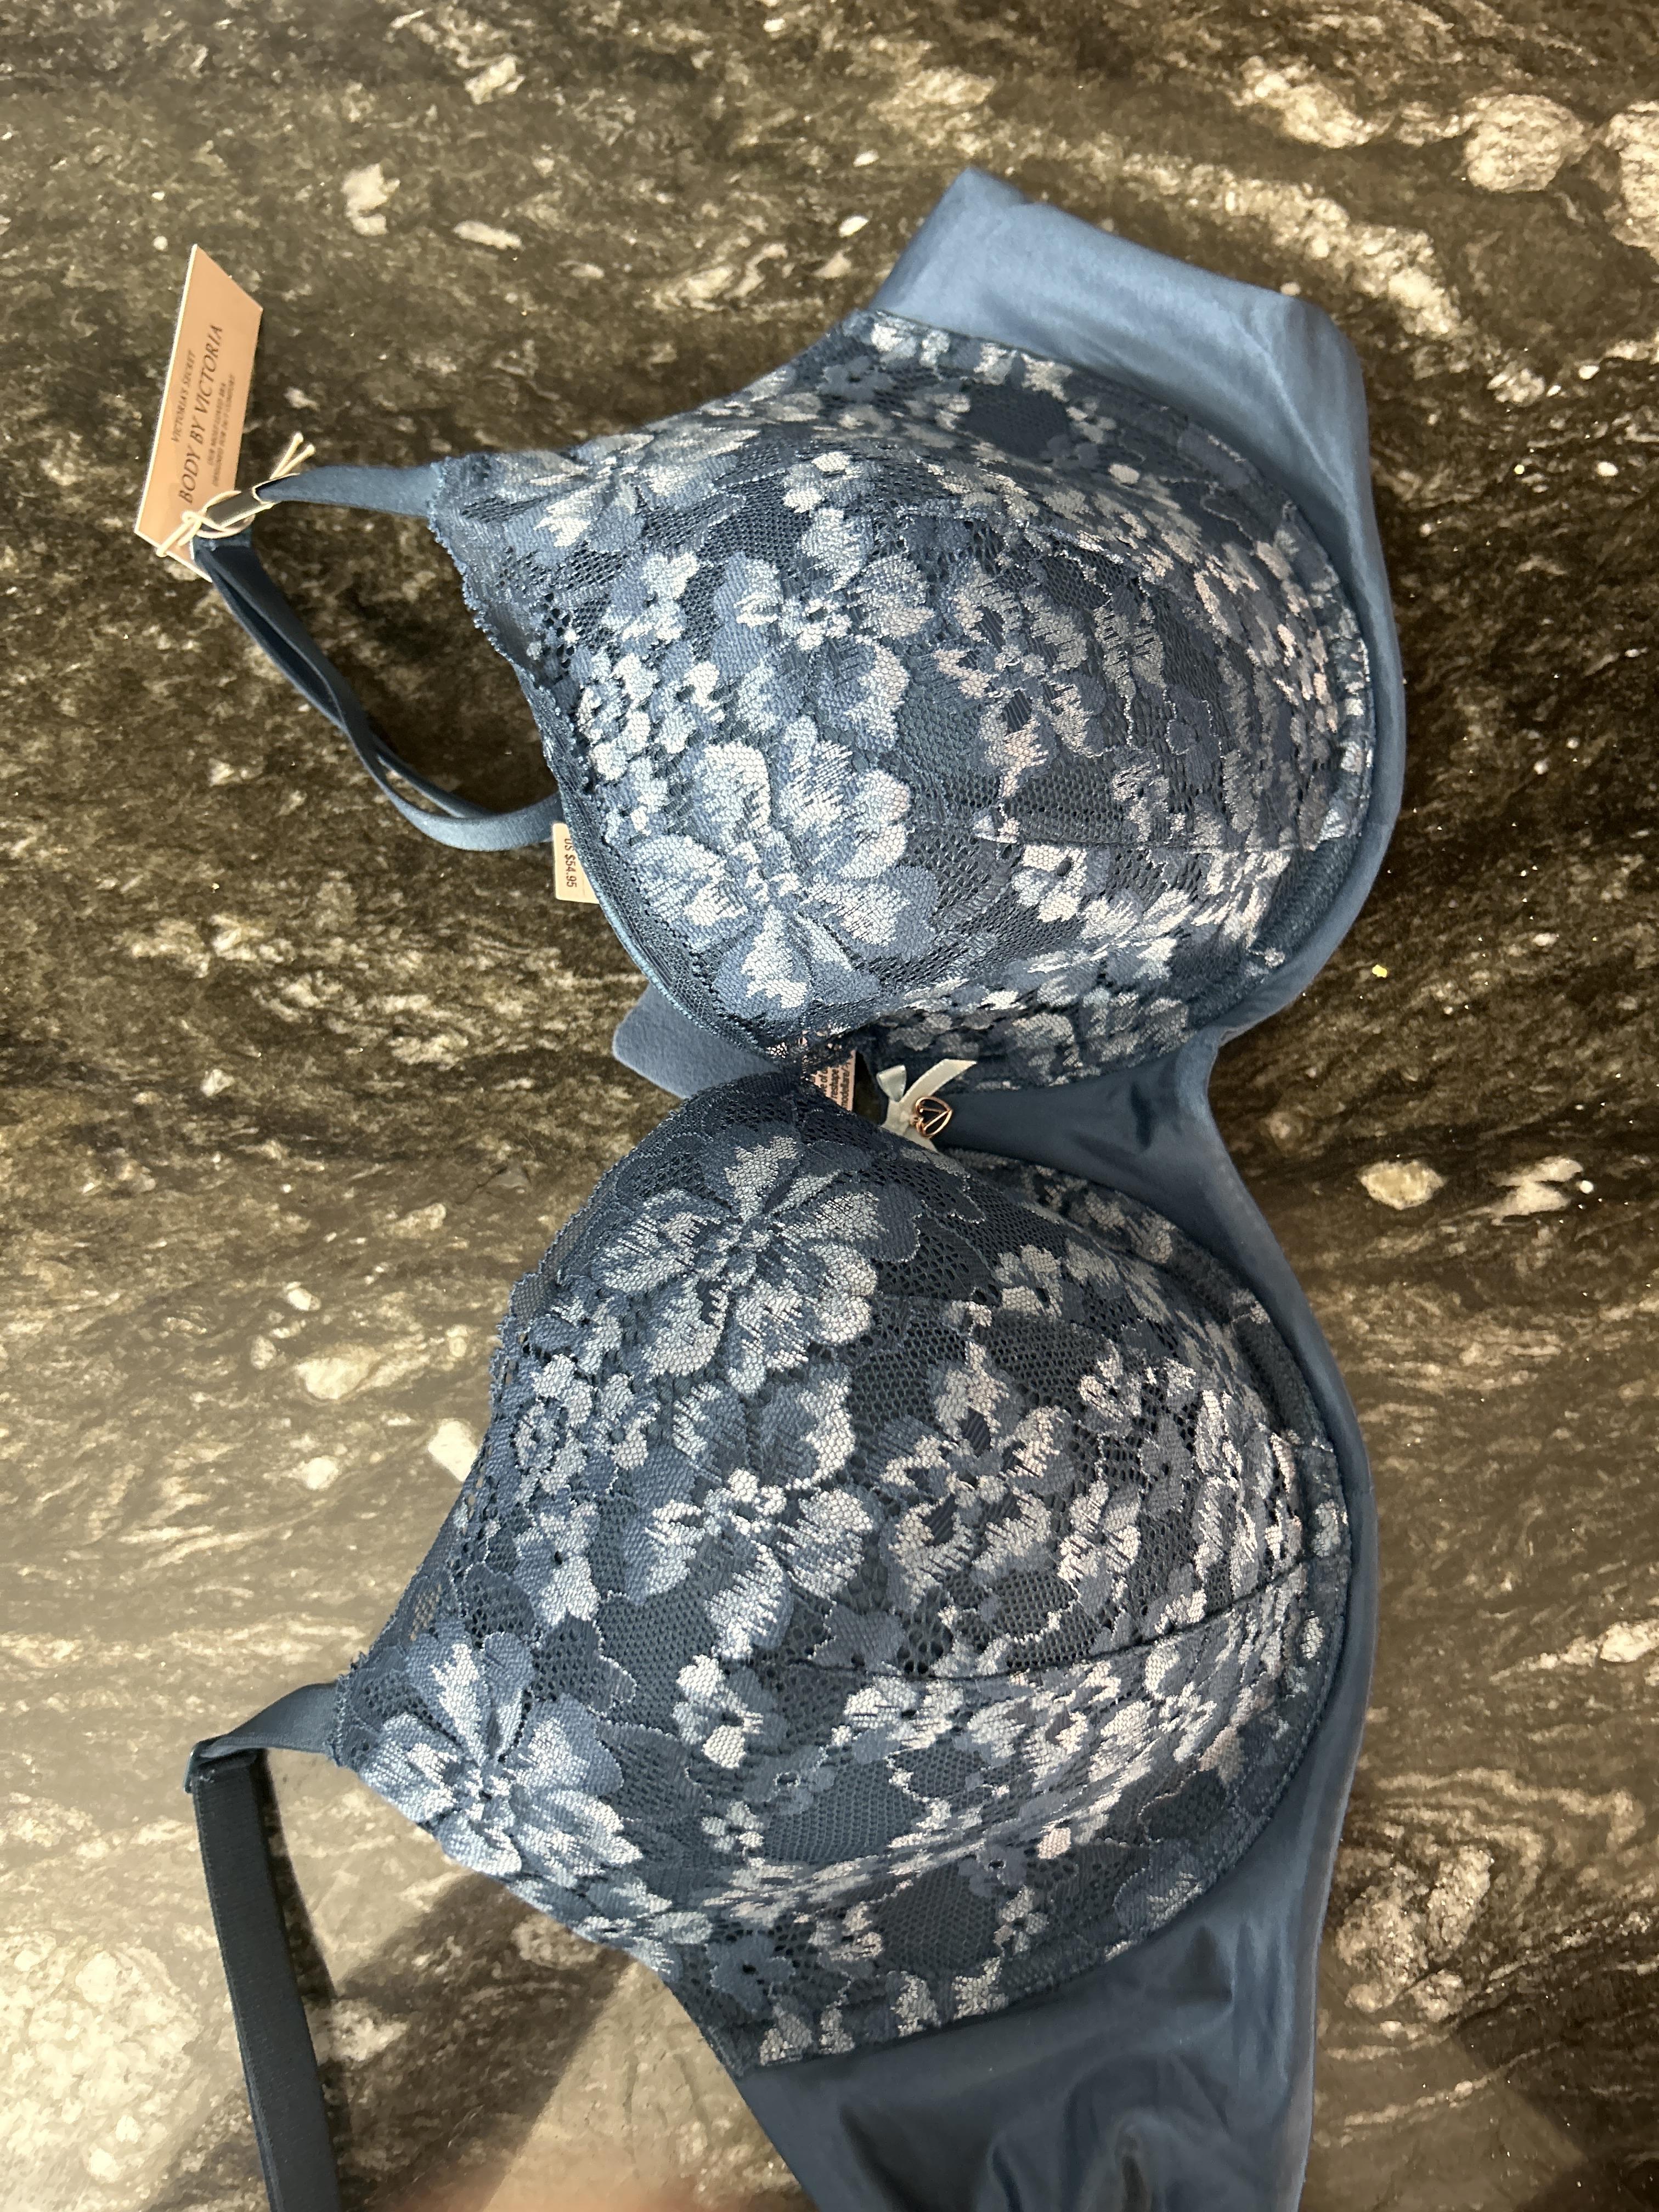 Buy Body By Victoria Lightly Lined Lace Demi Bra online in Dubai